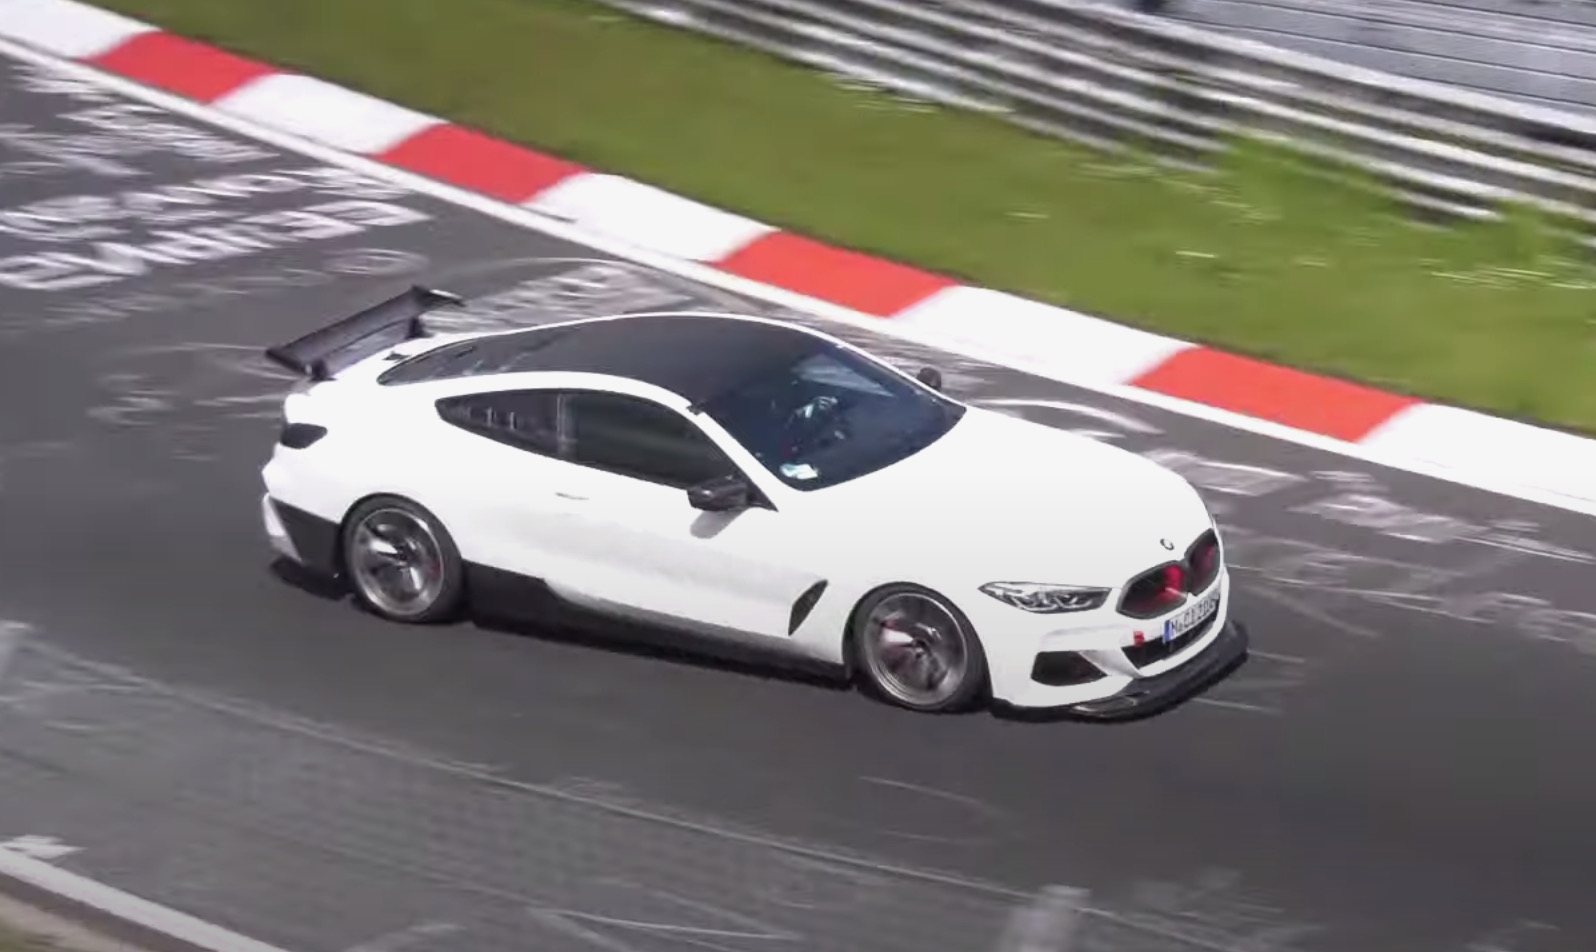 Video: BMW M8 ‘CSL’ prototype? Or test bed for future M hybrid 6CYL powertrain?